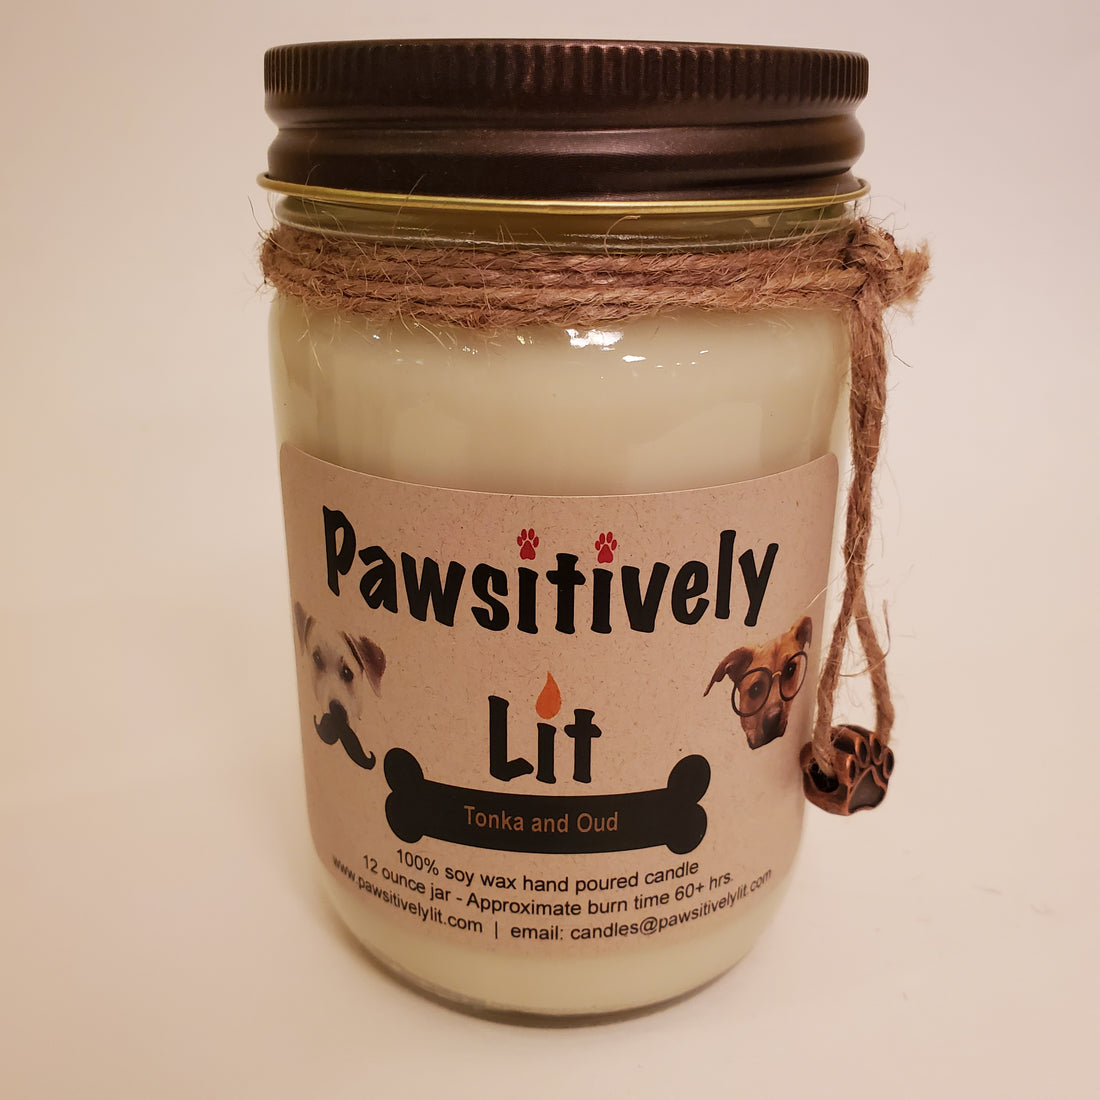 Tonka and Oud Scented Pawsitively Lit 100% Soy Wax Mason Jar Candle